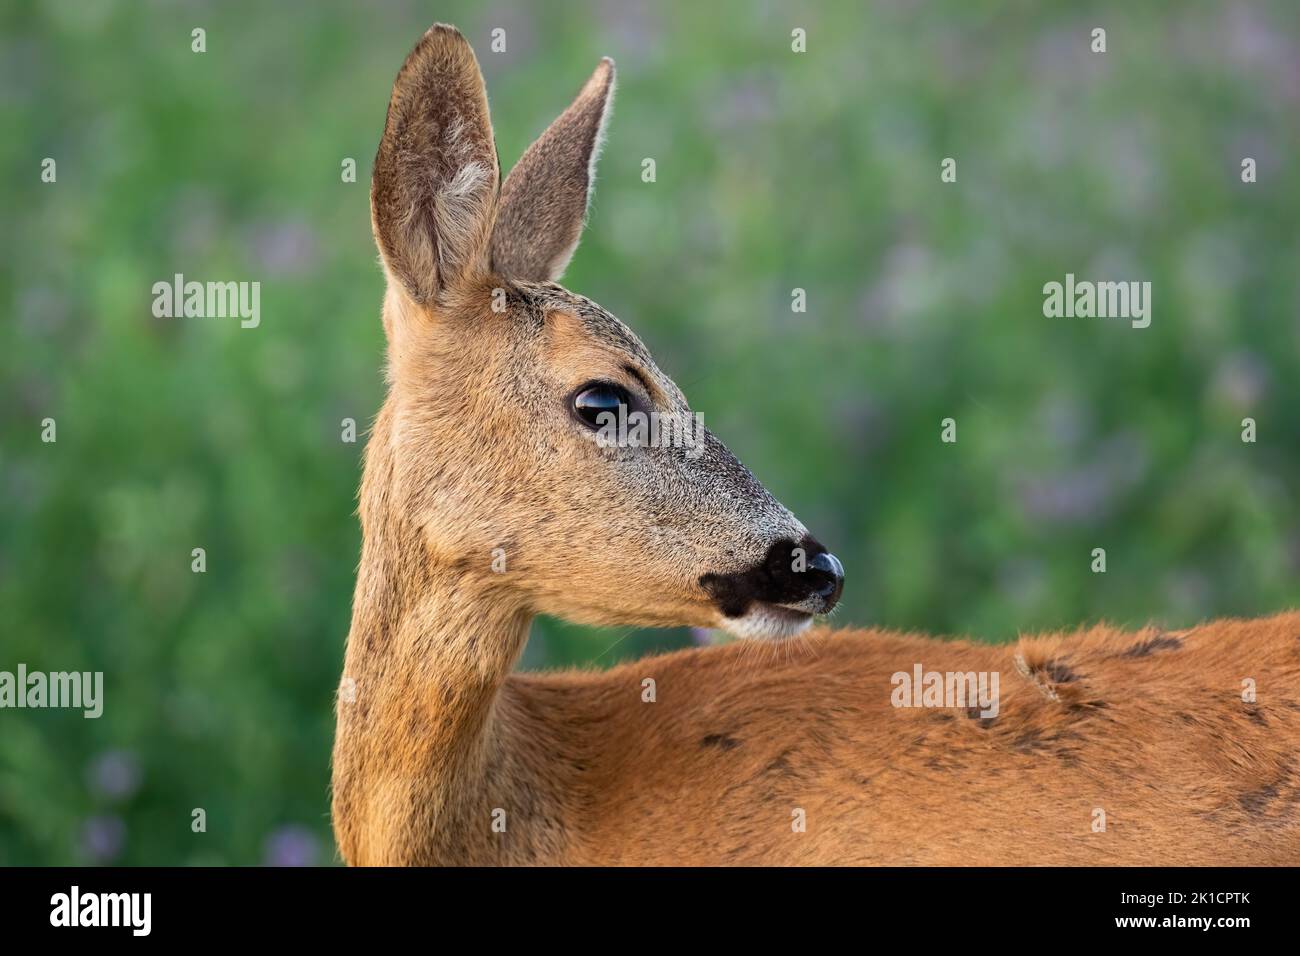 Roe deer doe looking behind over shoulder in close-up view on a green meadow Stock Photo